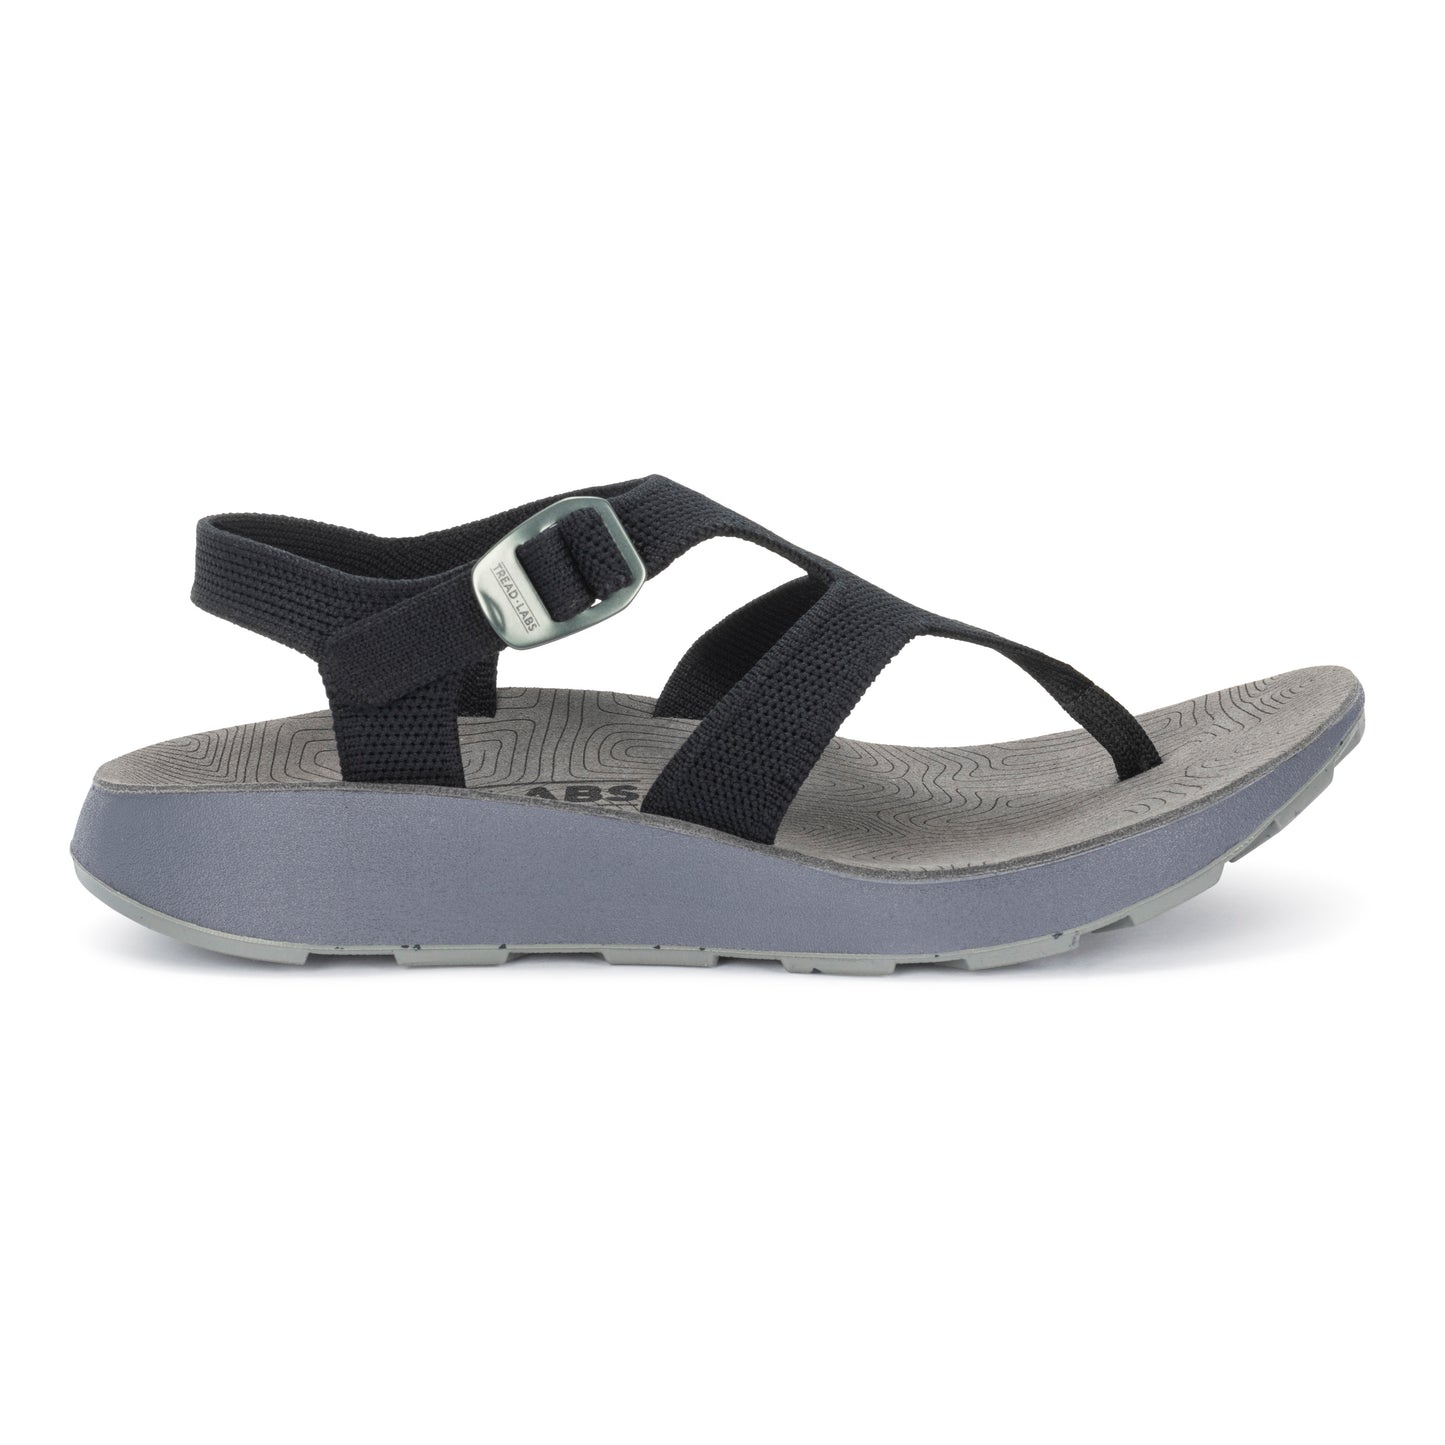 Refreshed Women's Albion Sandal